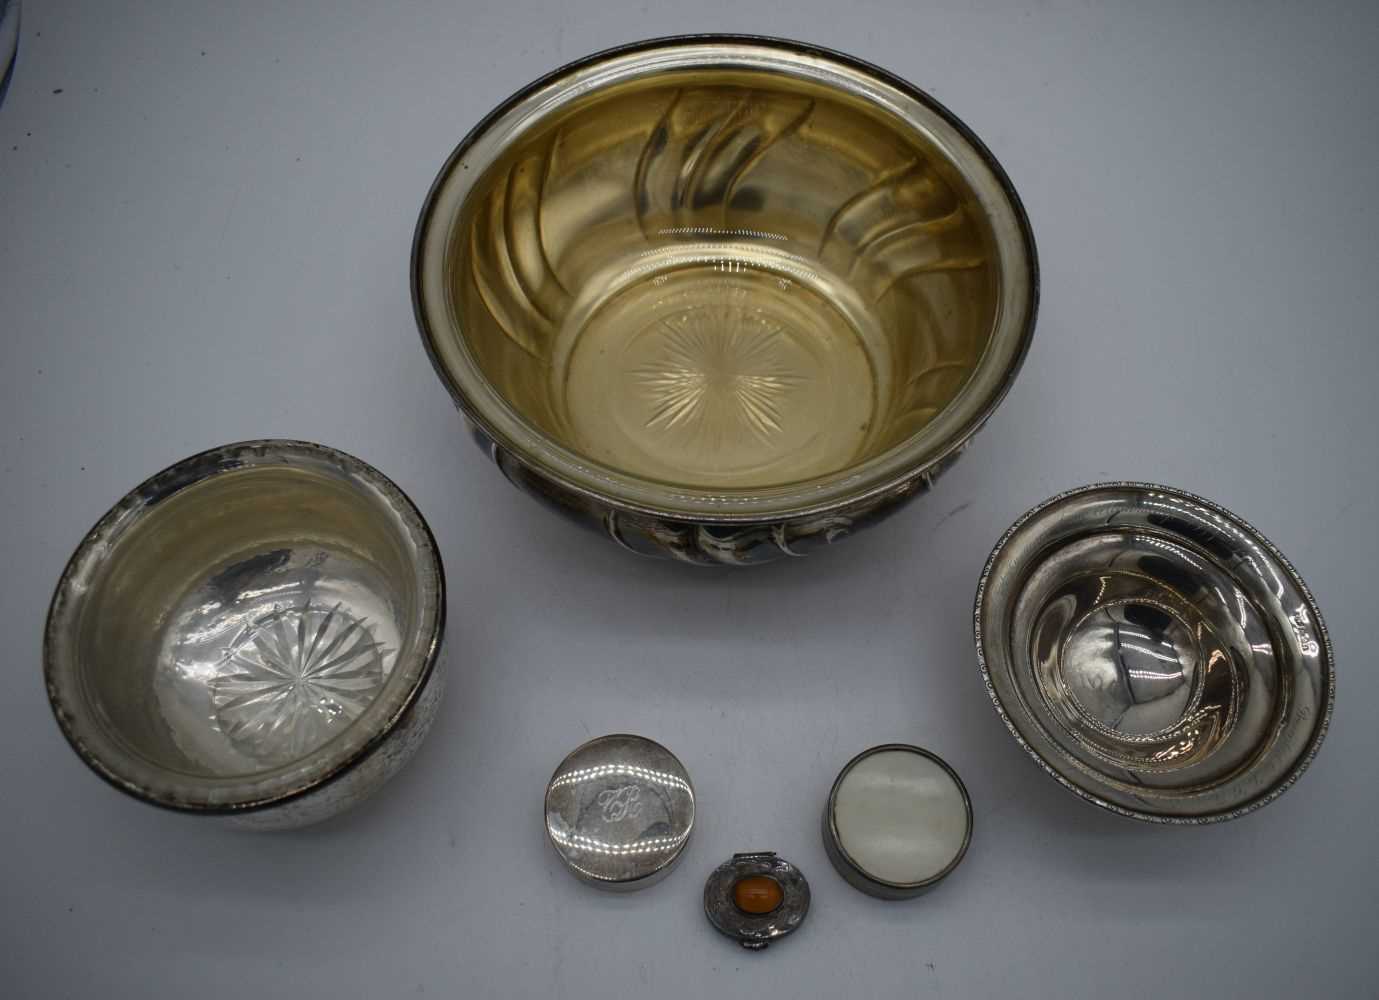 TWO LARGE CONTINENTAL SILVER BOWLS together with an English silver bowl & three continental silver - Image 3 of 7